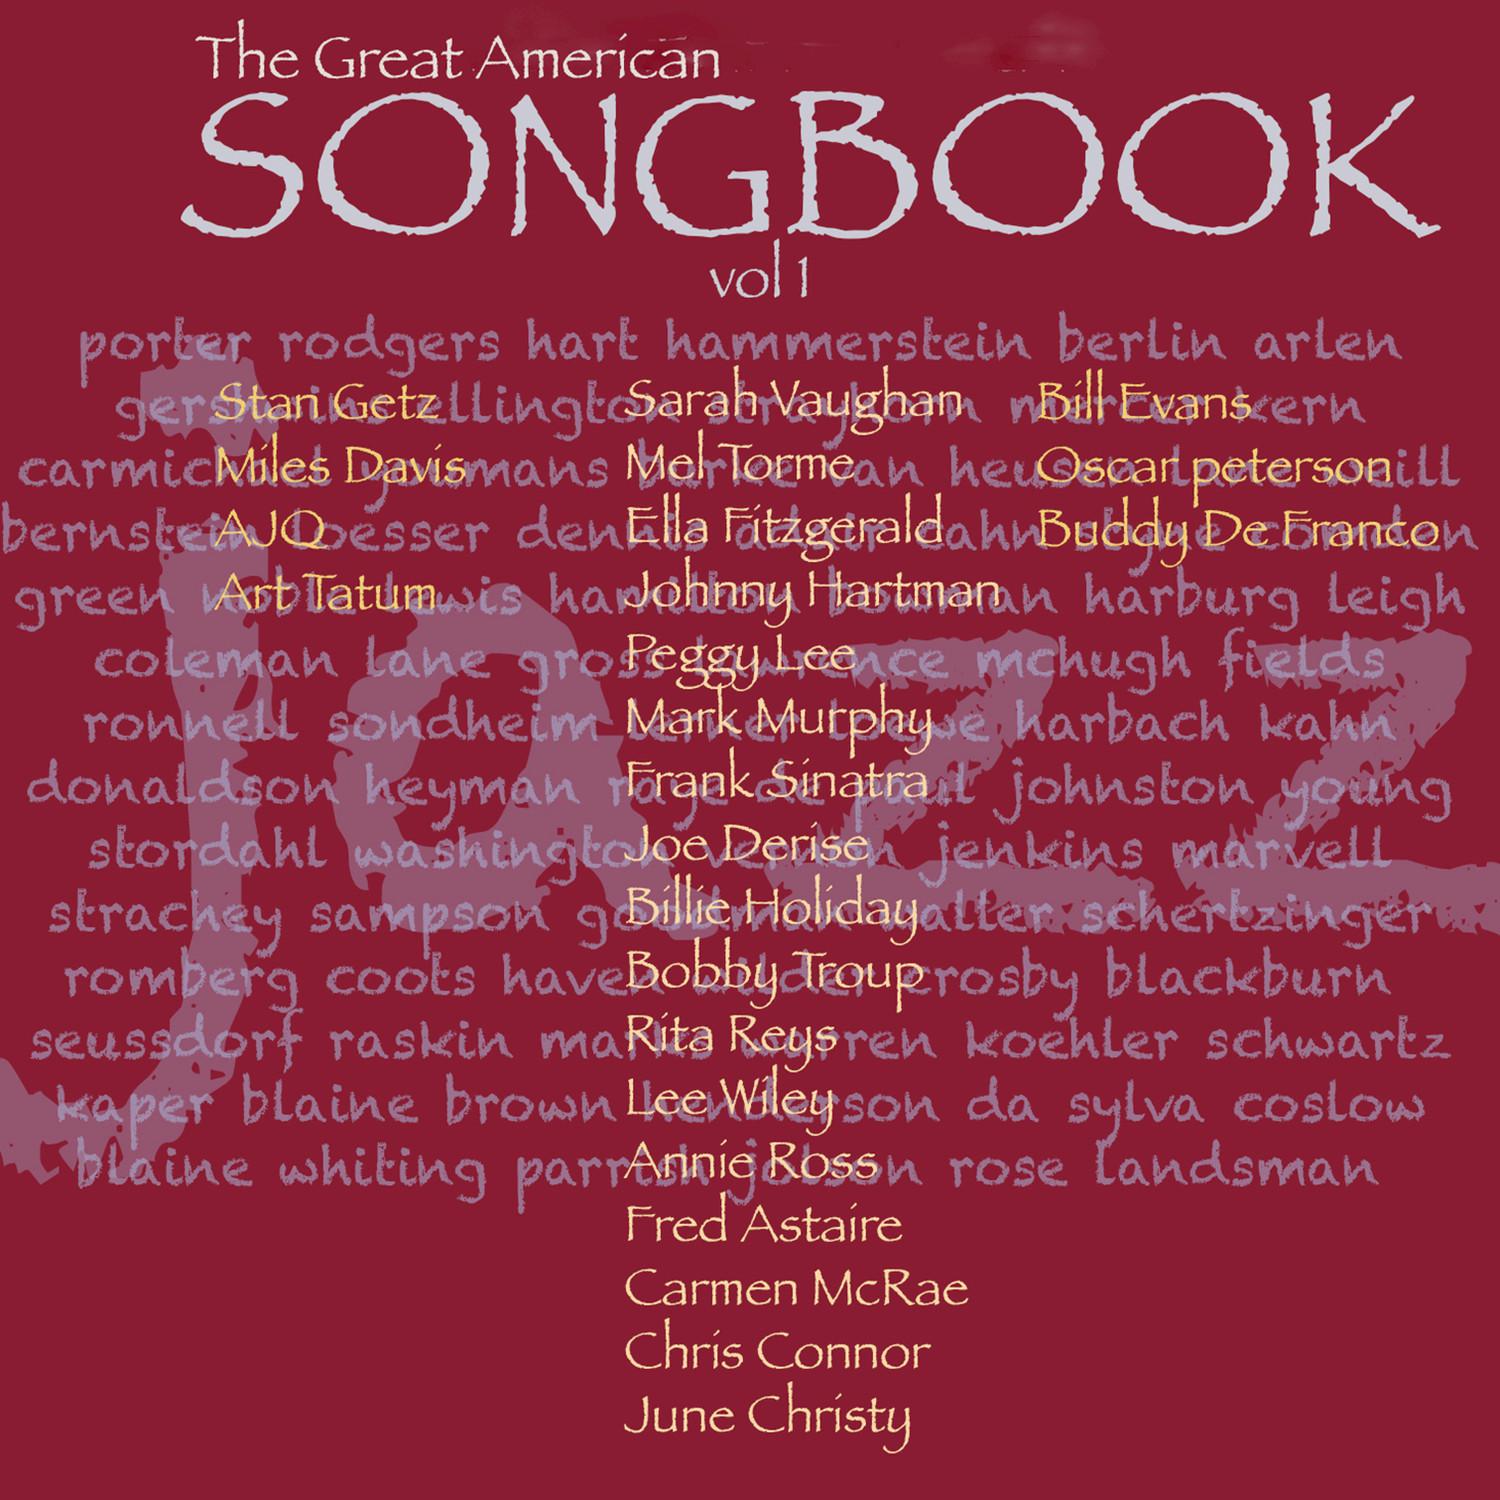 The Great American Songbook, Vol. 1